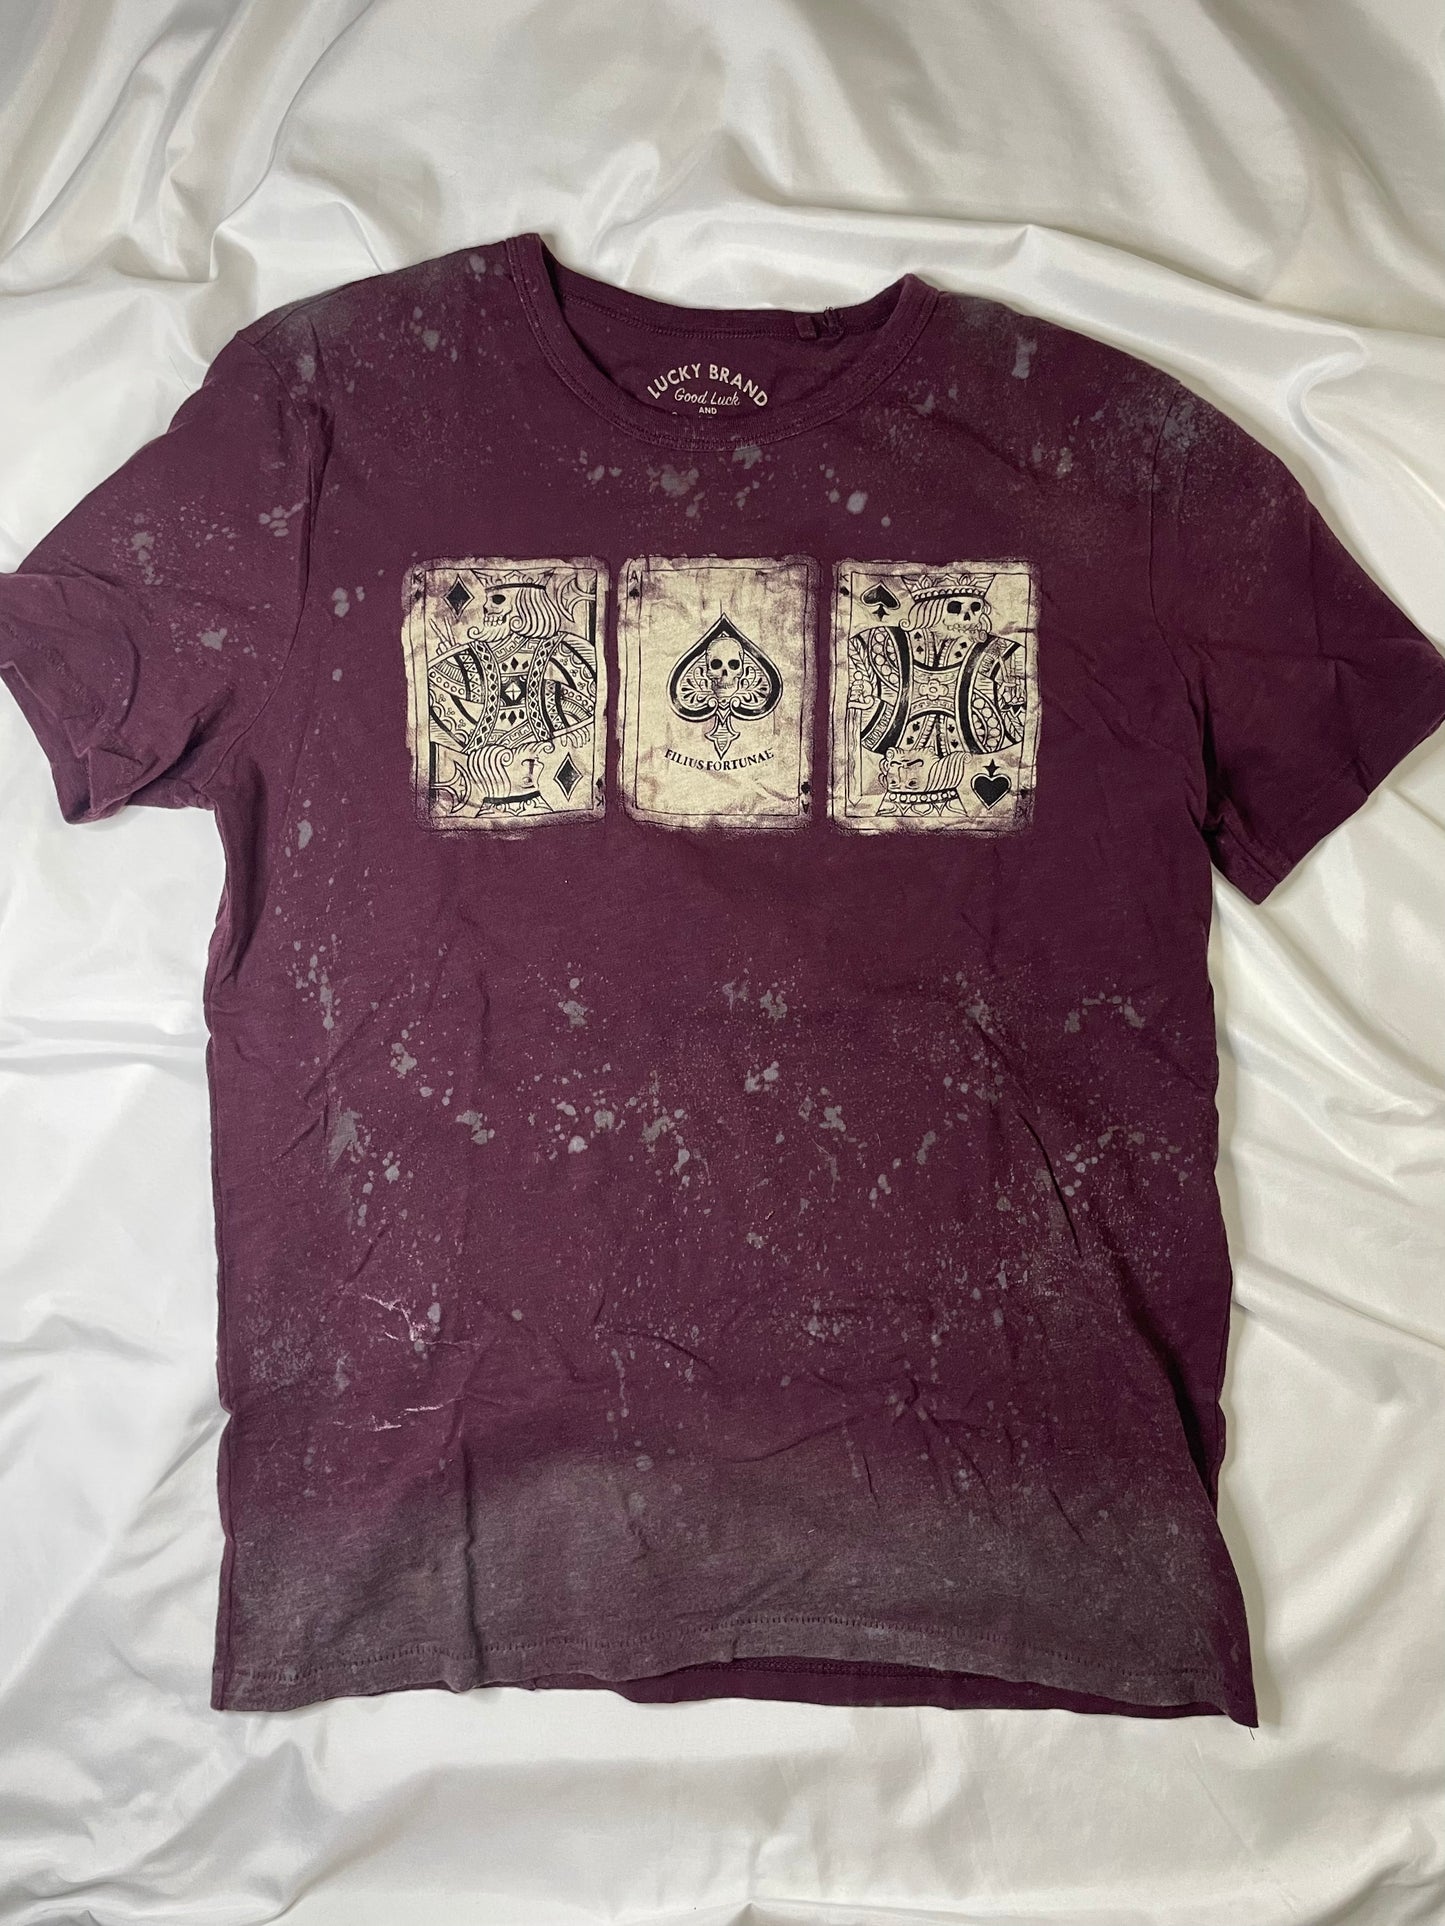 Hand dyed lucky brand tee